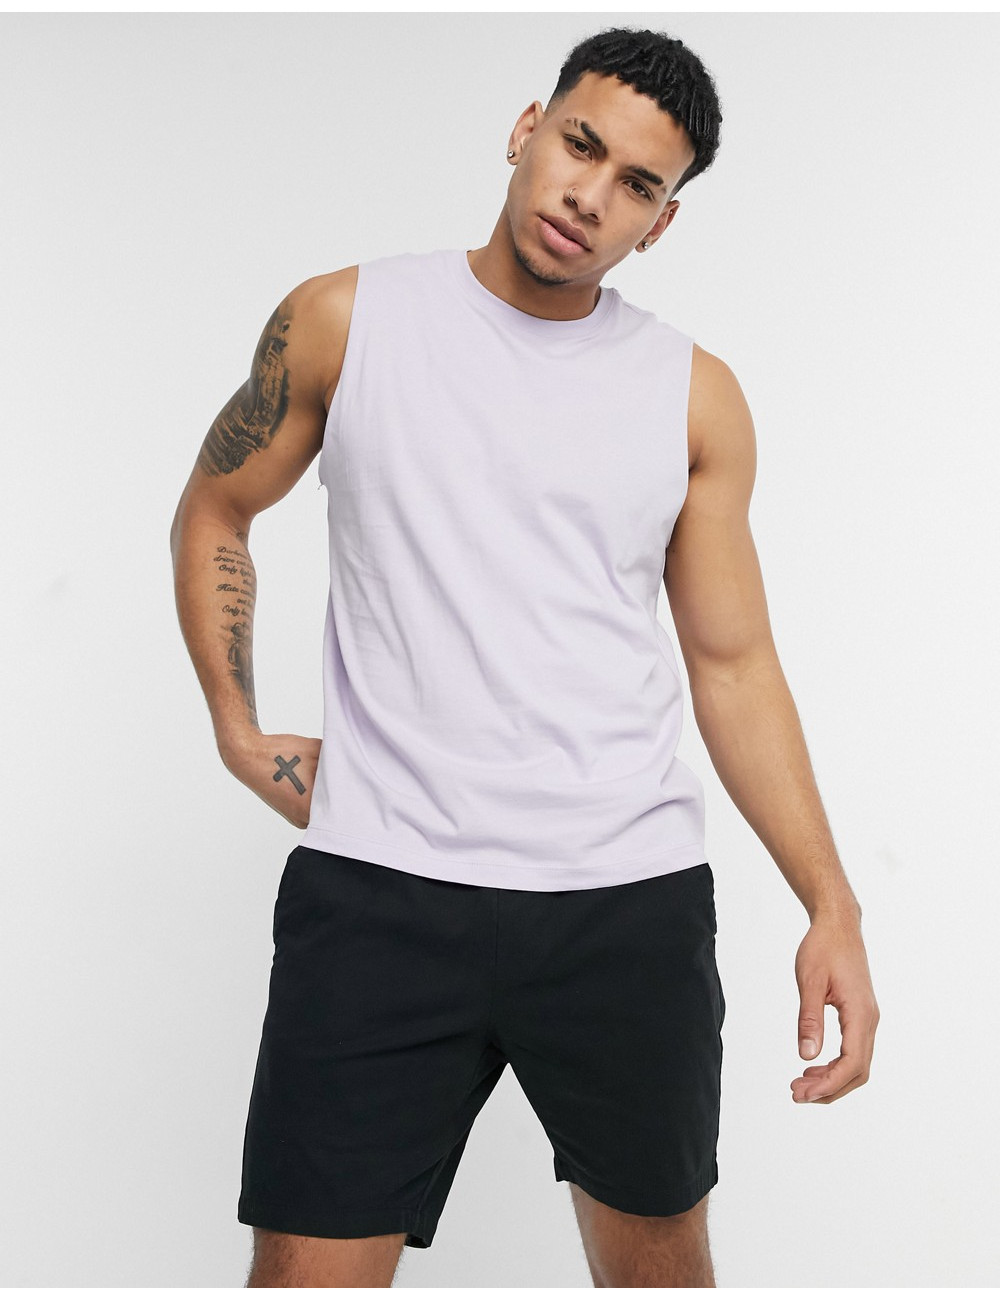 New Look vest in lilac